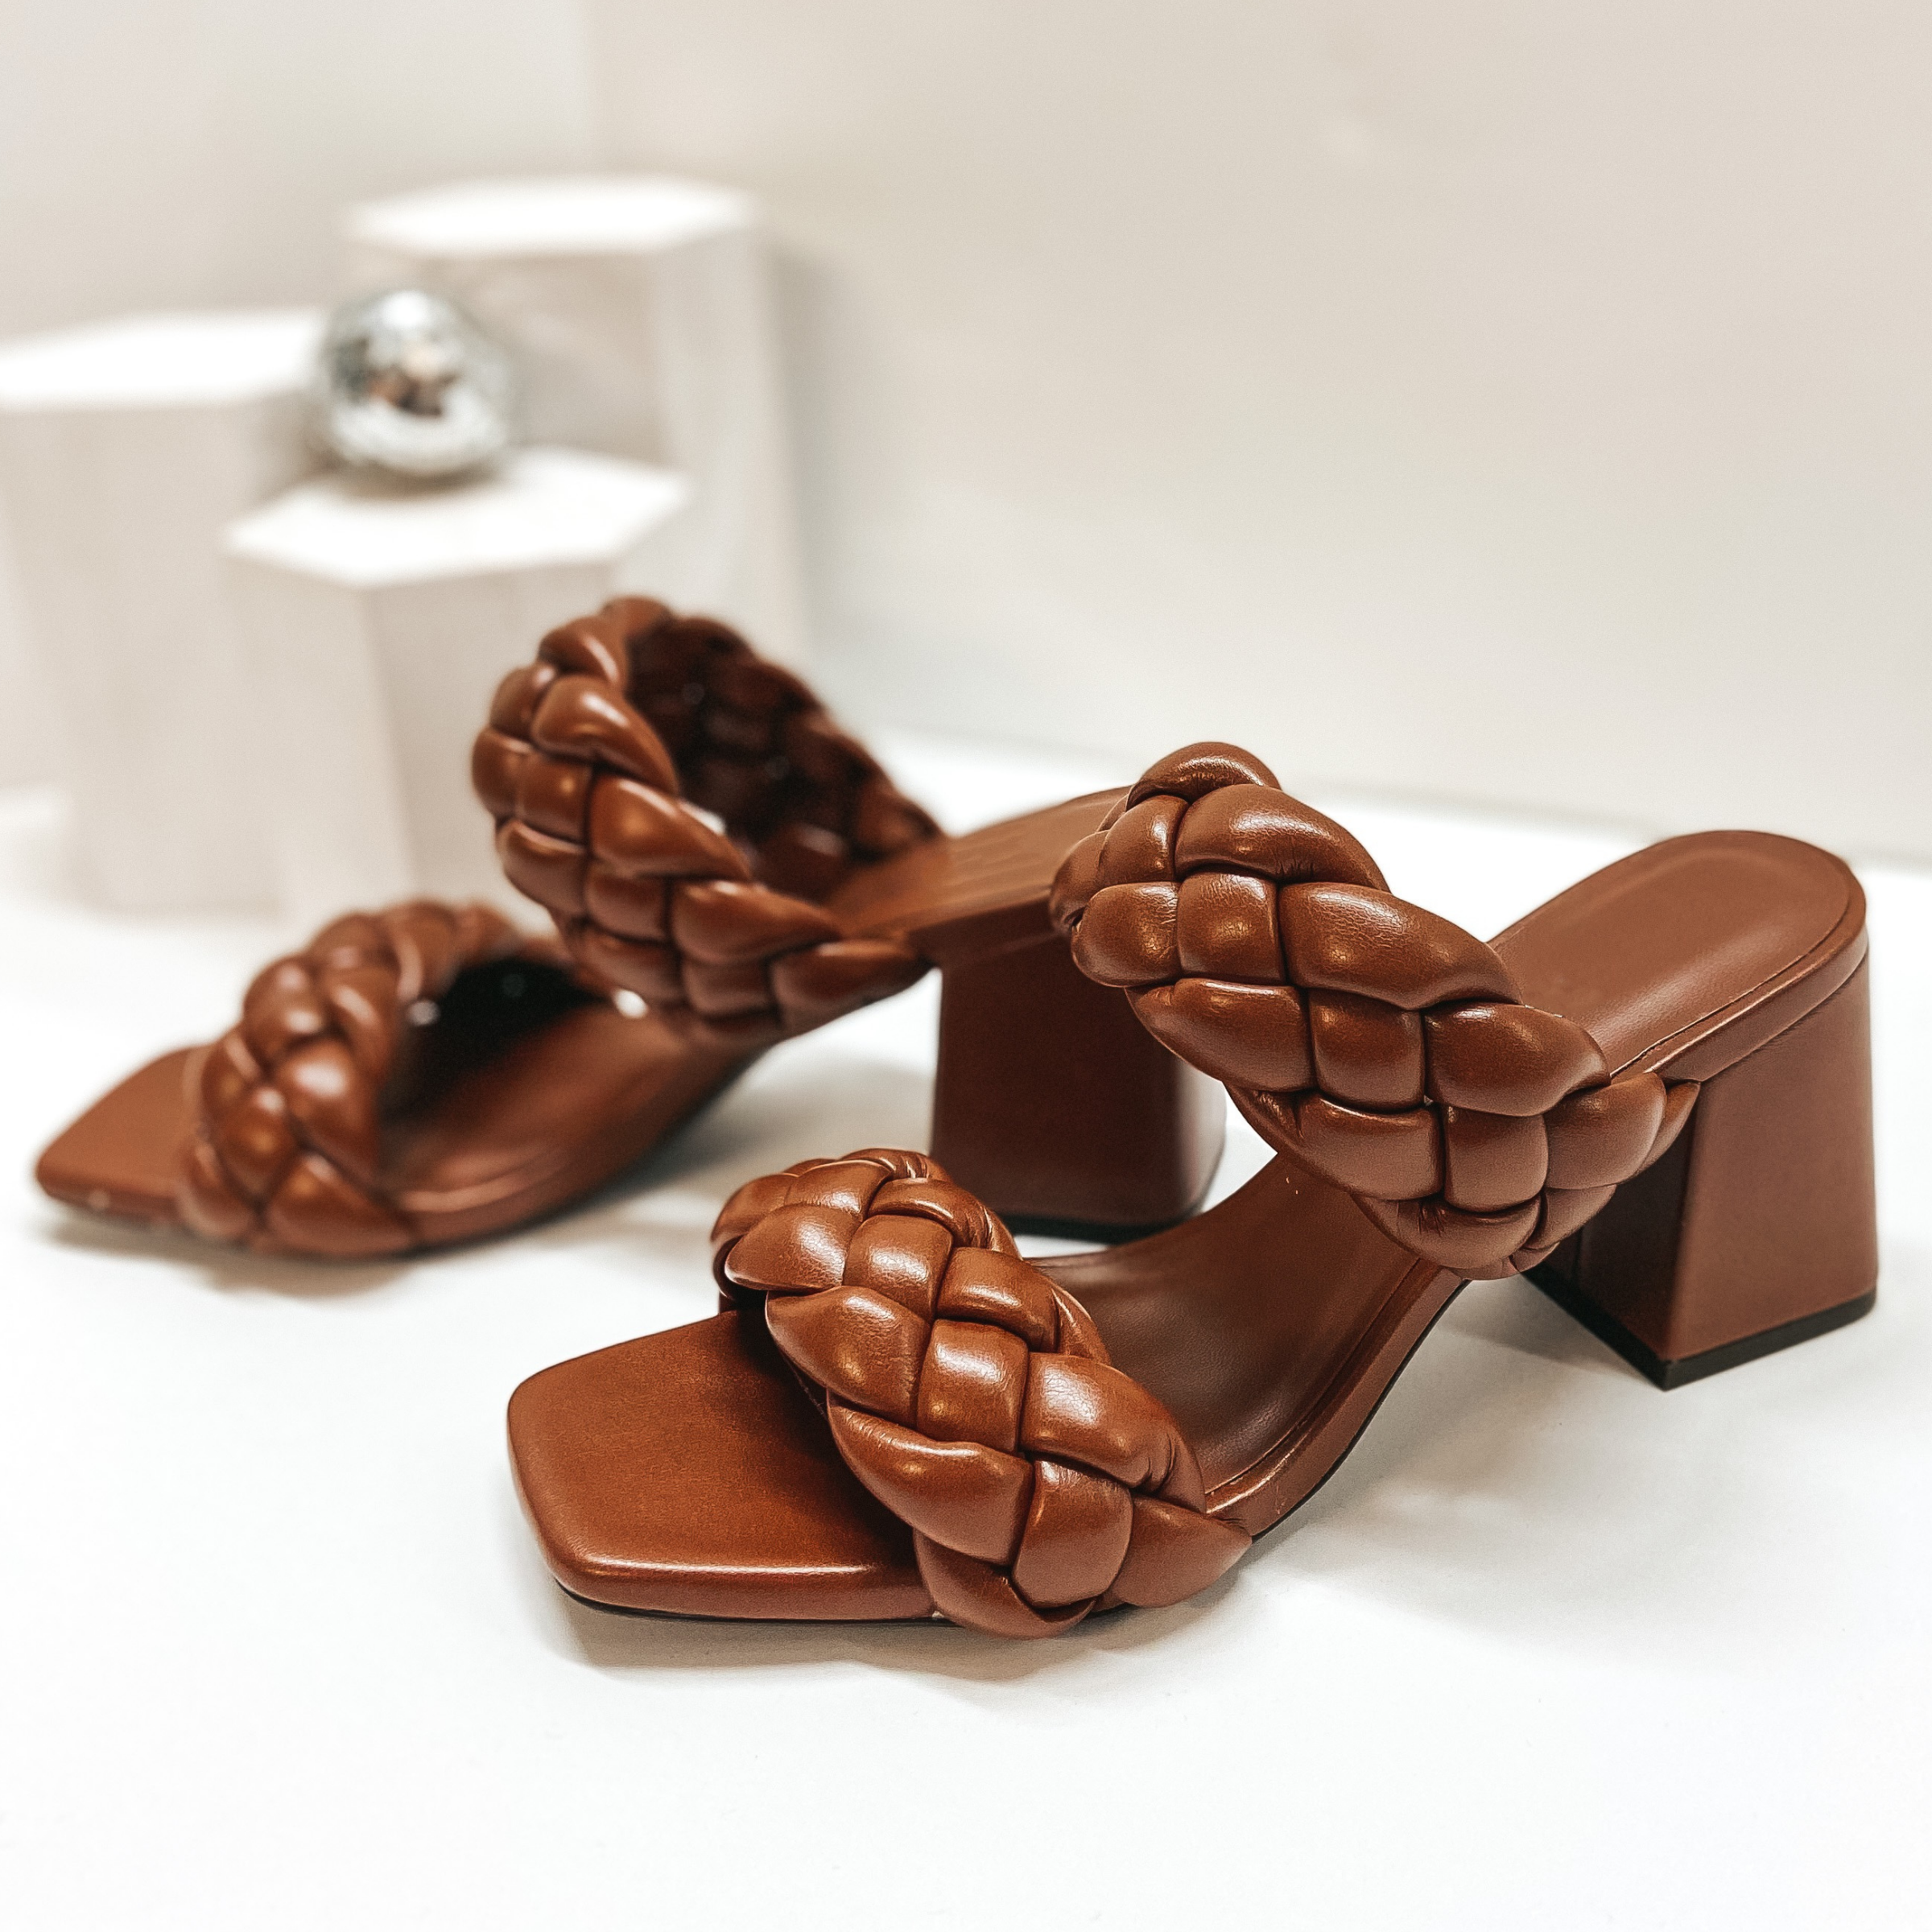 Brown braided block heels with two straps. Pictured against white background.